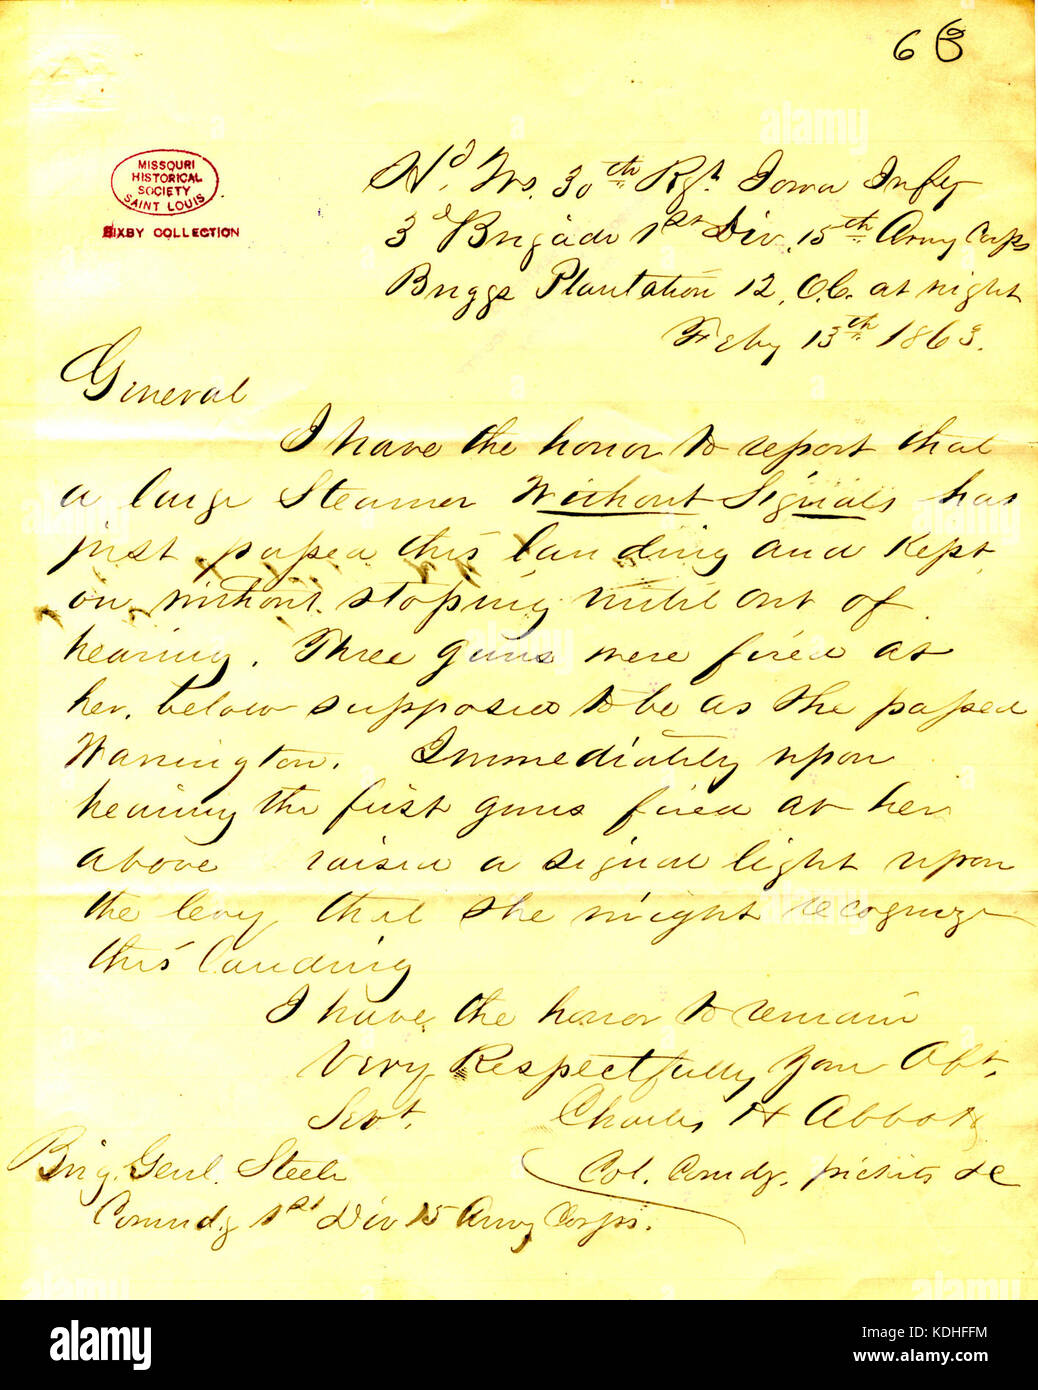 Letter from Charles H. Abbott, headquarters, 30th Iowa Infantry, 3rd Brigade, 1st Division, 15th Army Corps, Briggs Plantation, to Brigadier General Steele, February 13, 1863 Stock Photo